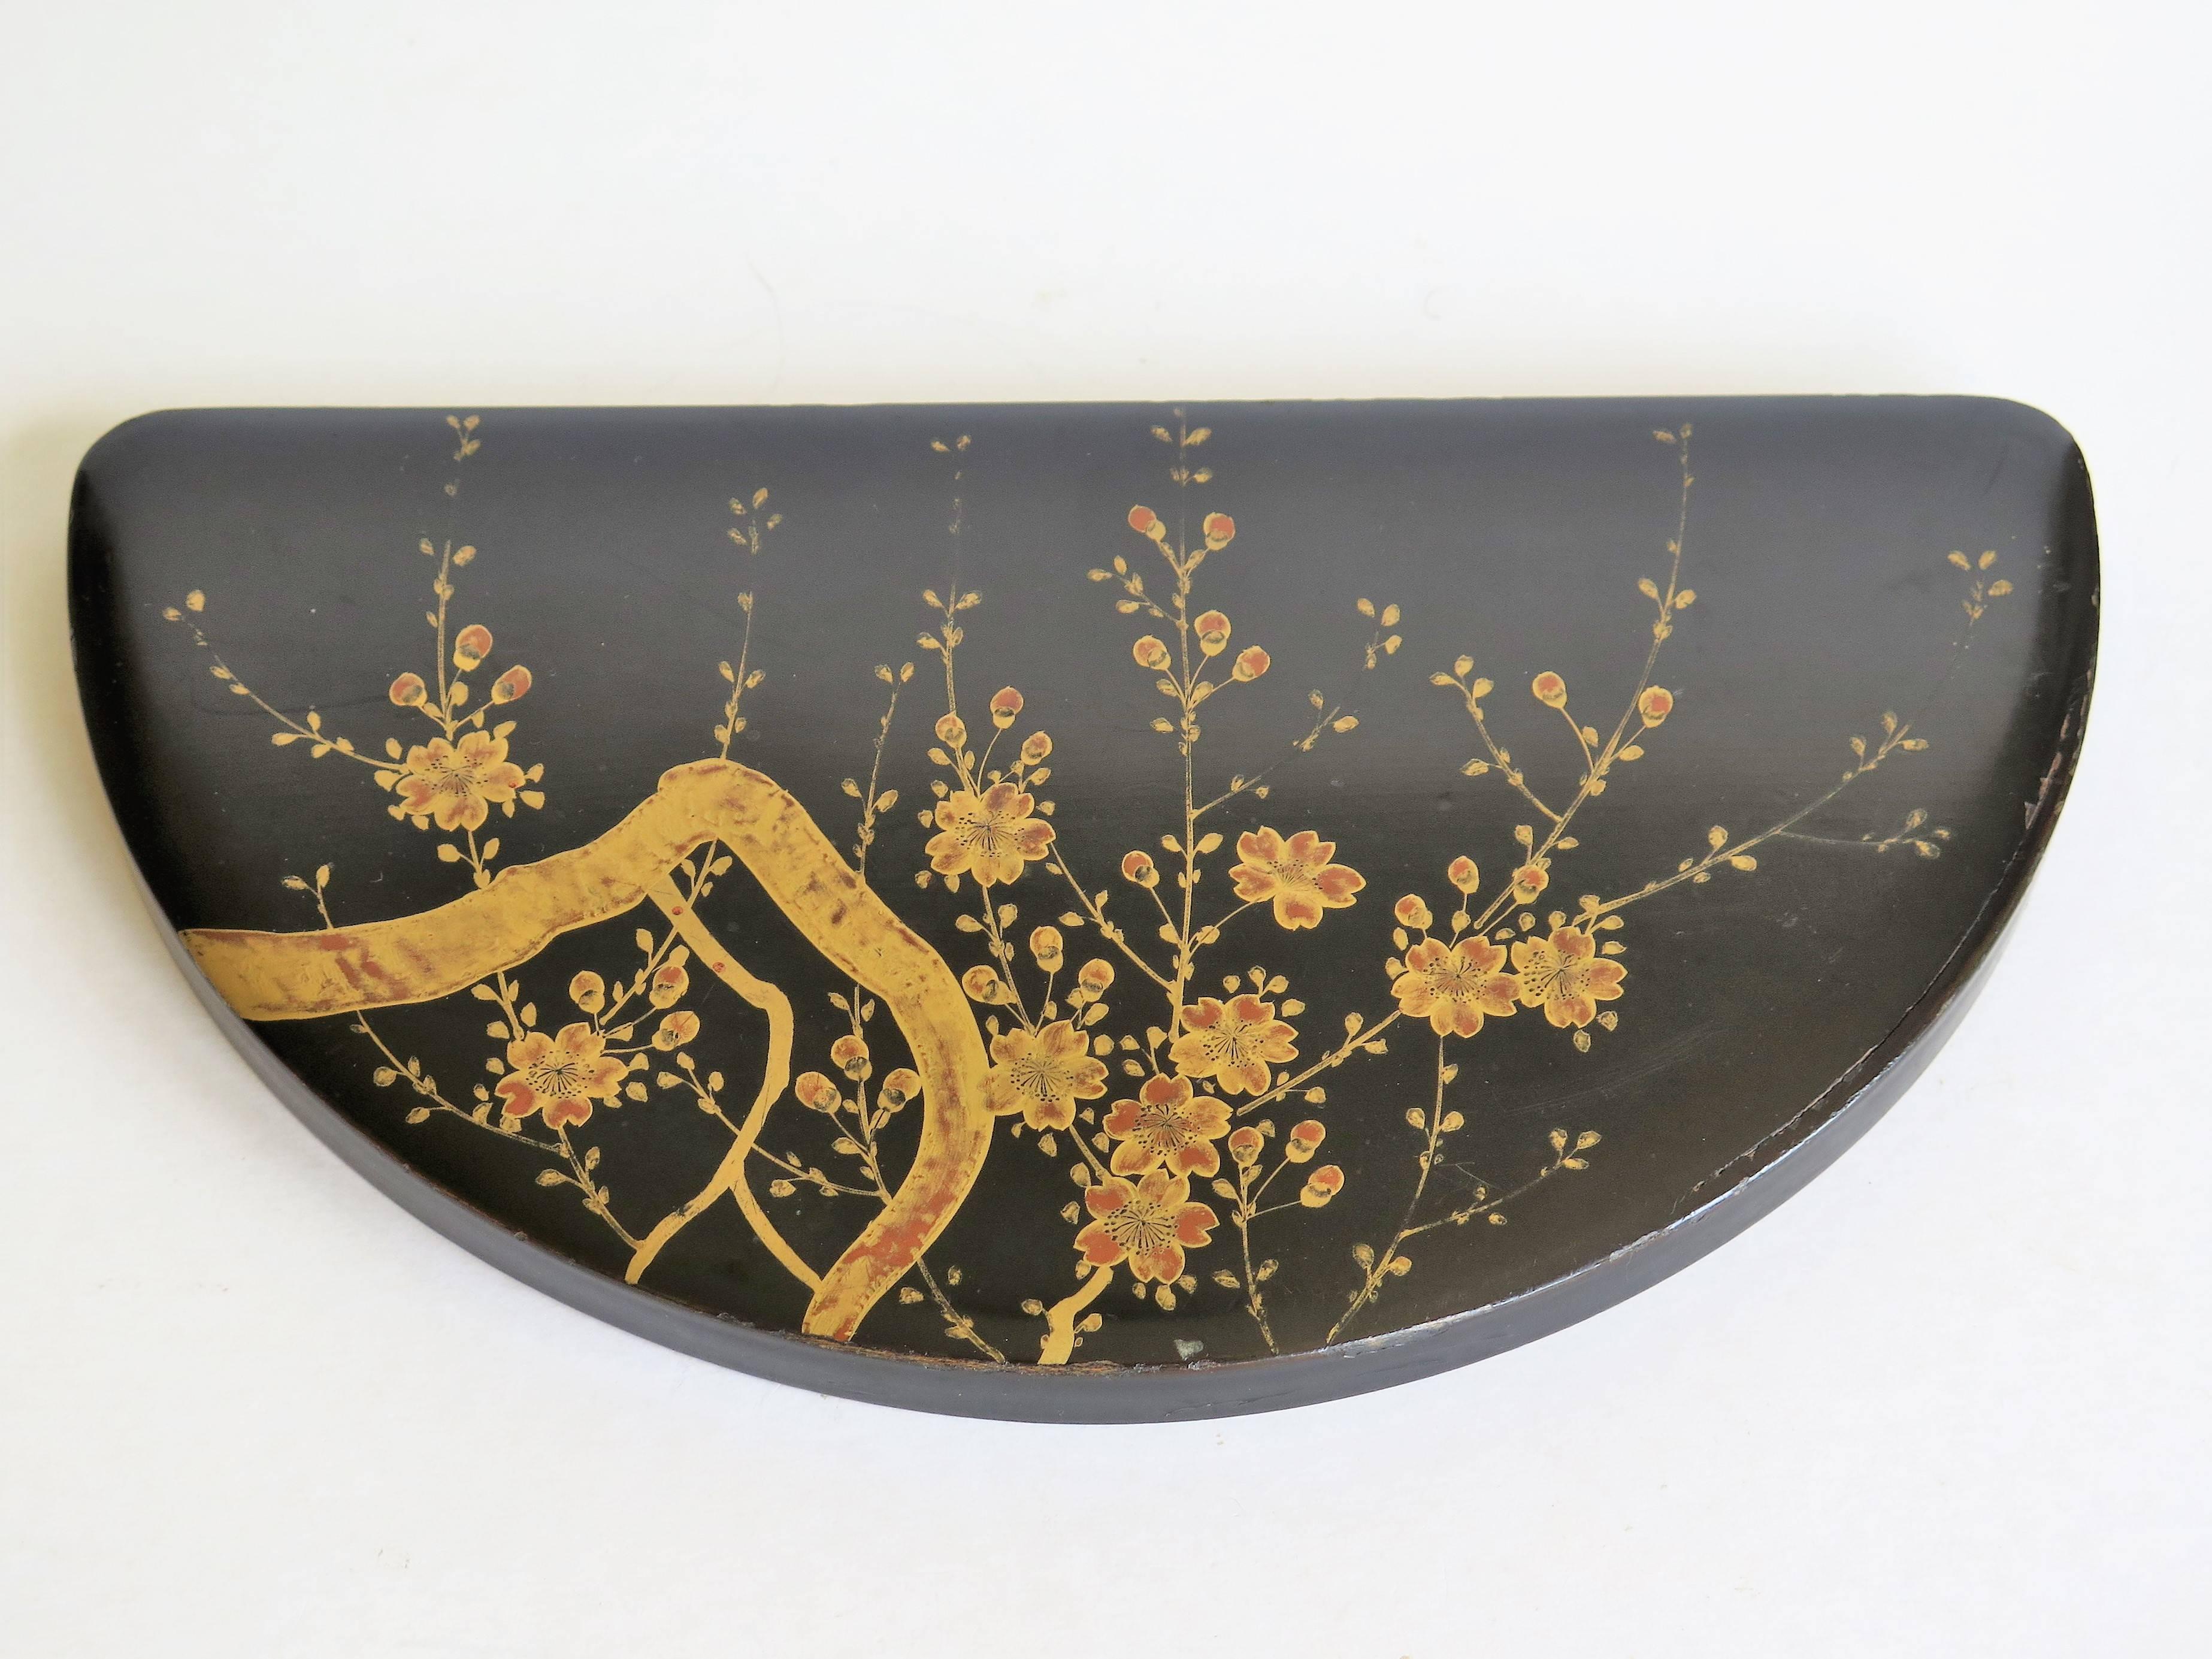 Meiji Japanese Papier Mâché Lacquered Box Hand-Painted with 3-Section Tray, circa 1905